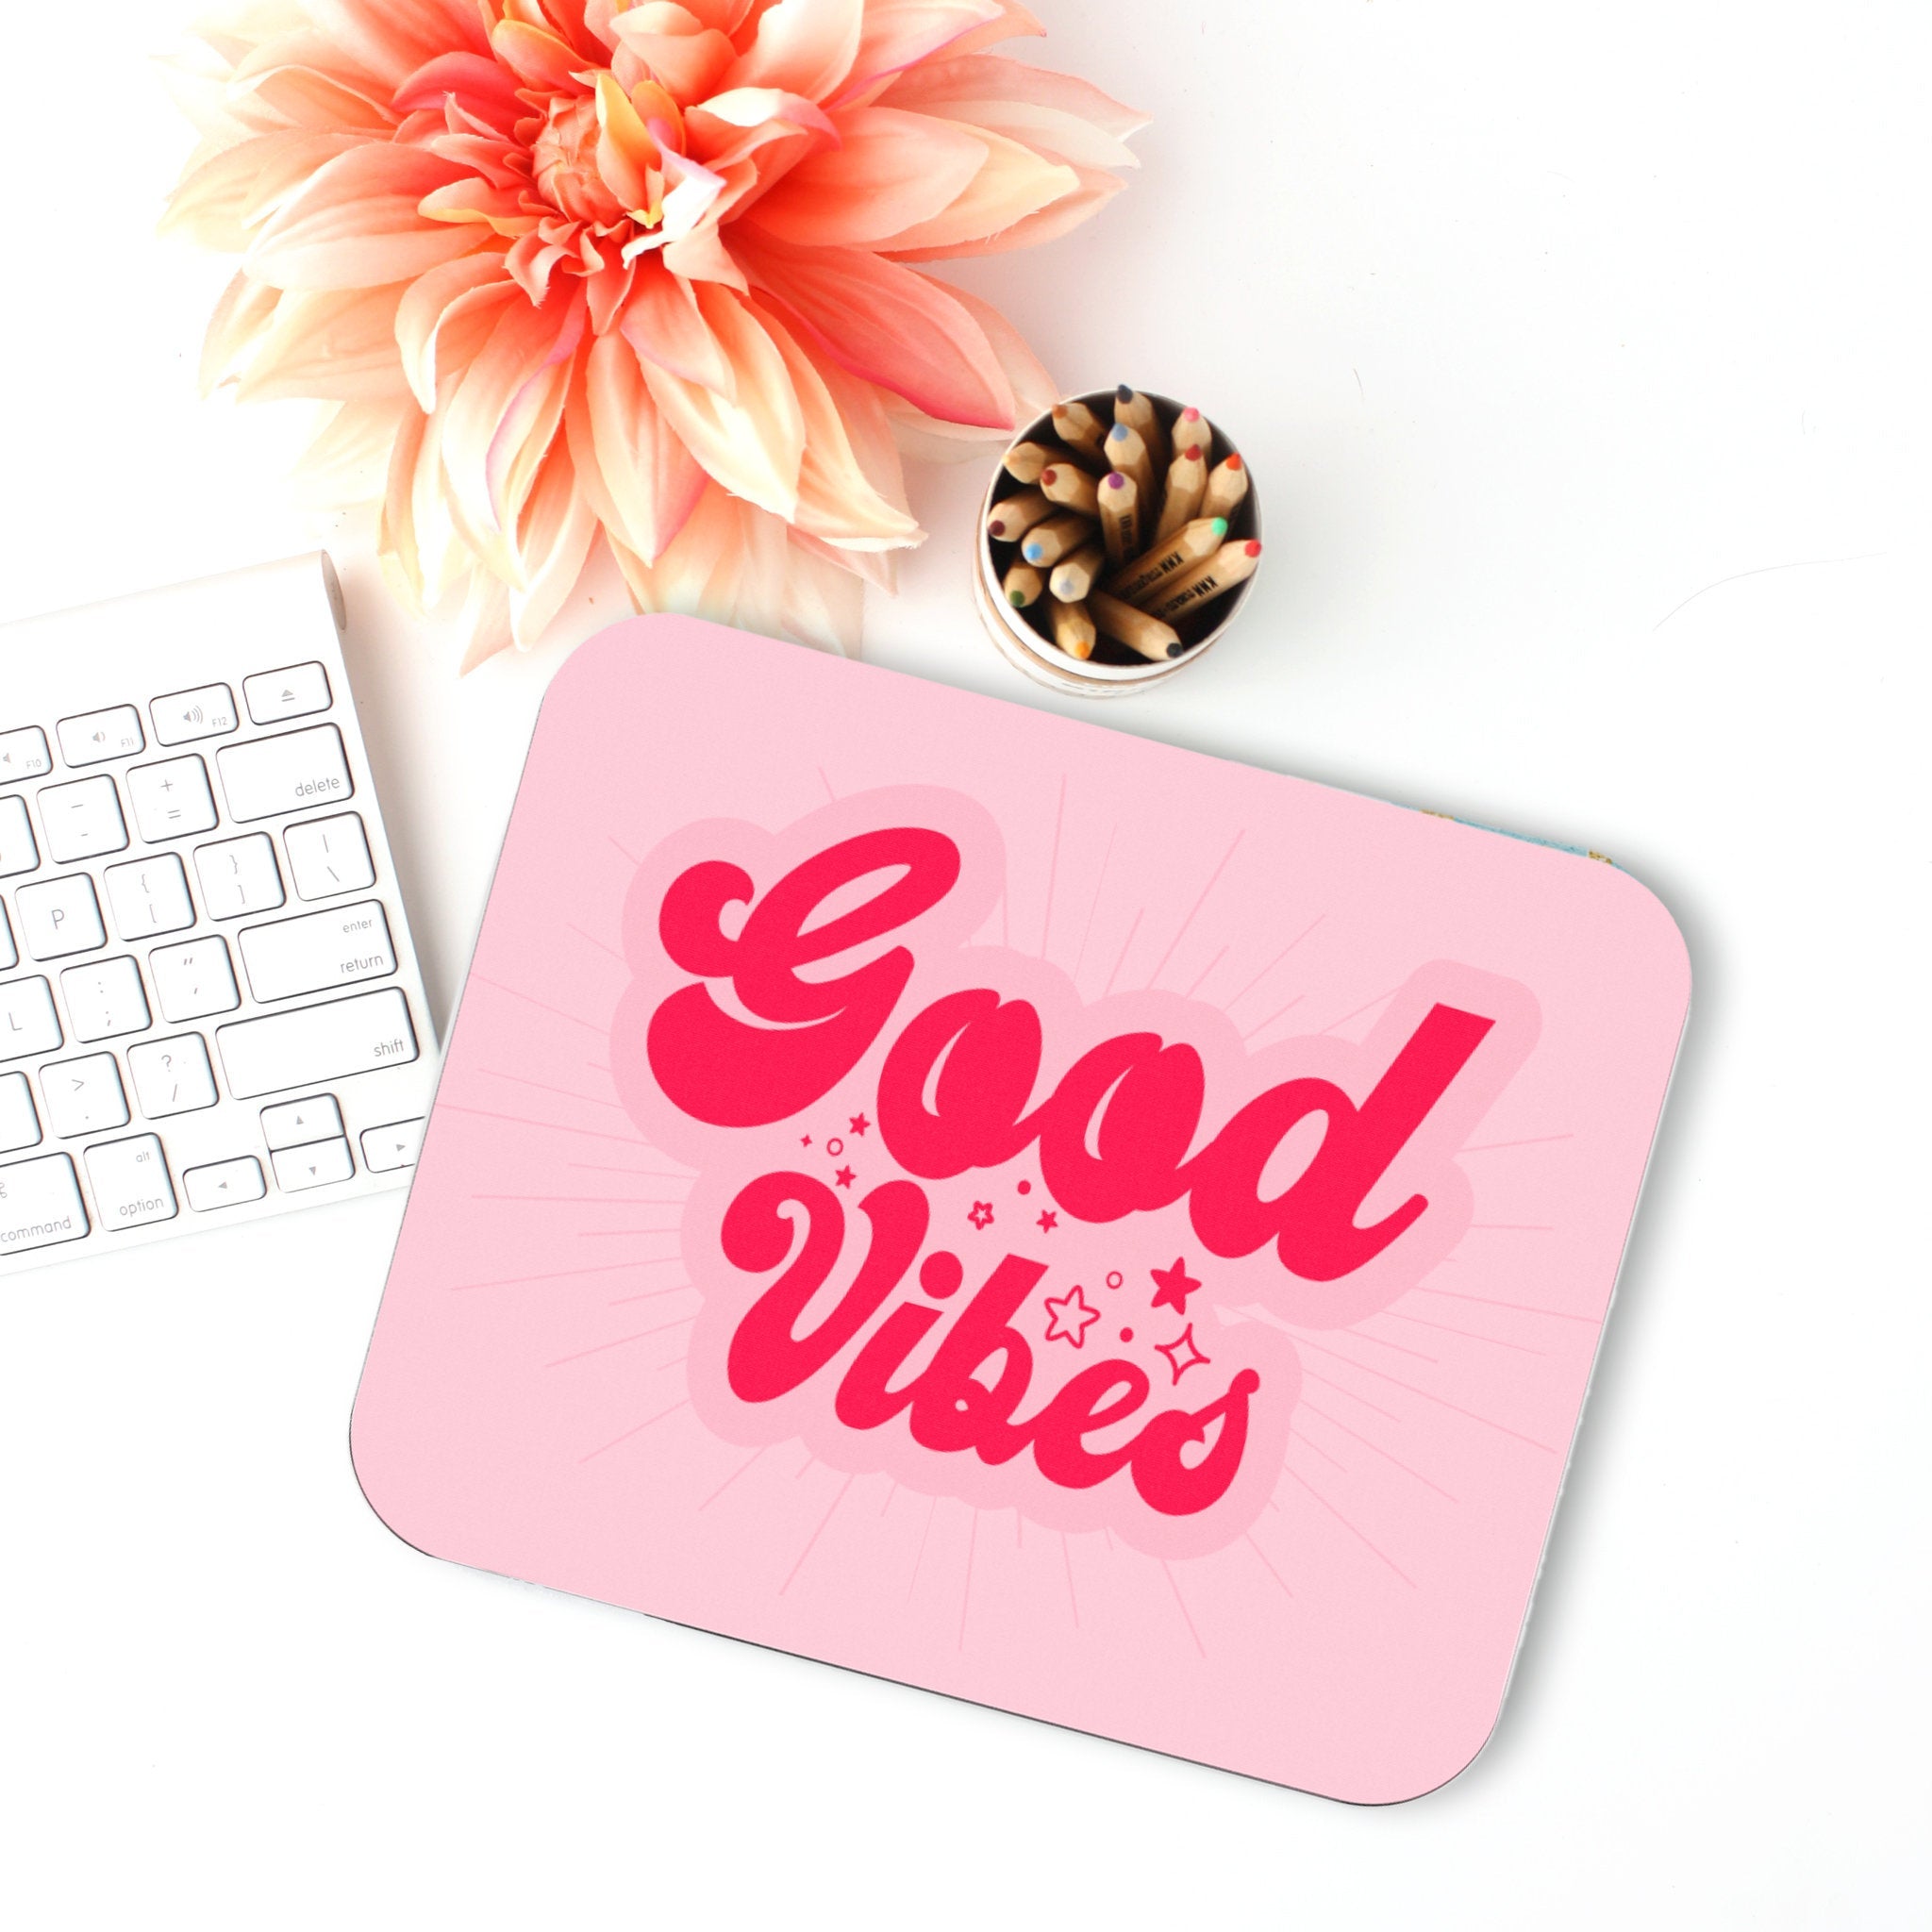 Good Vibes Mouse Pad, Desk Accessories, Office Decor for Women, Office –  littlepaperies